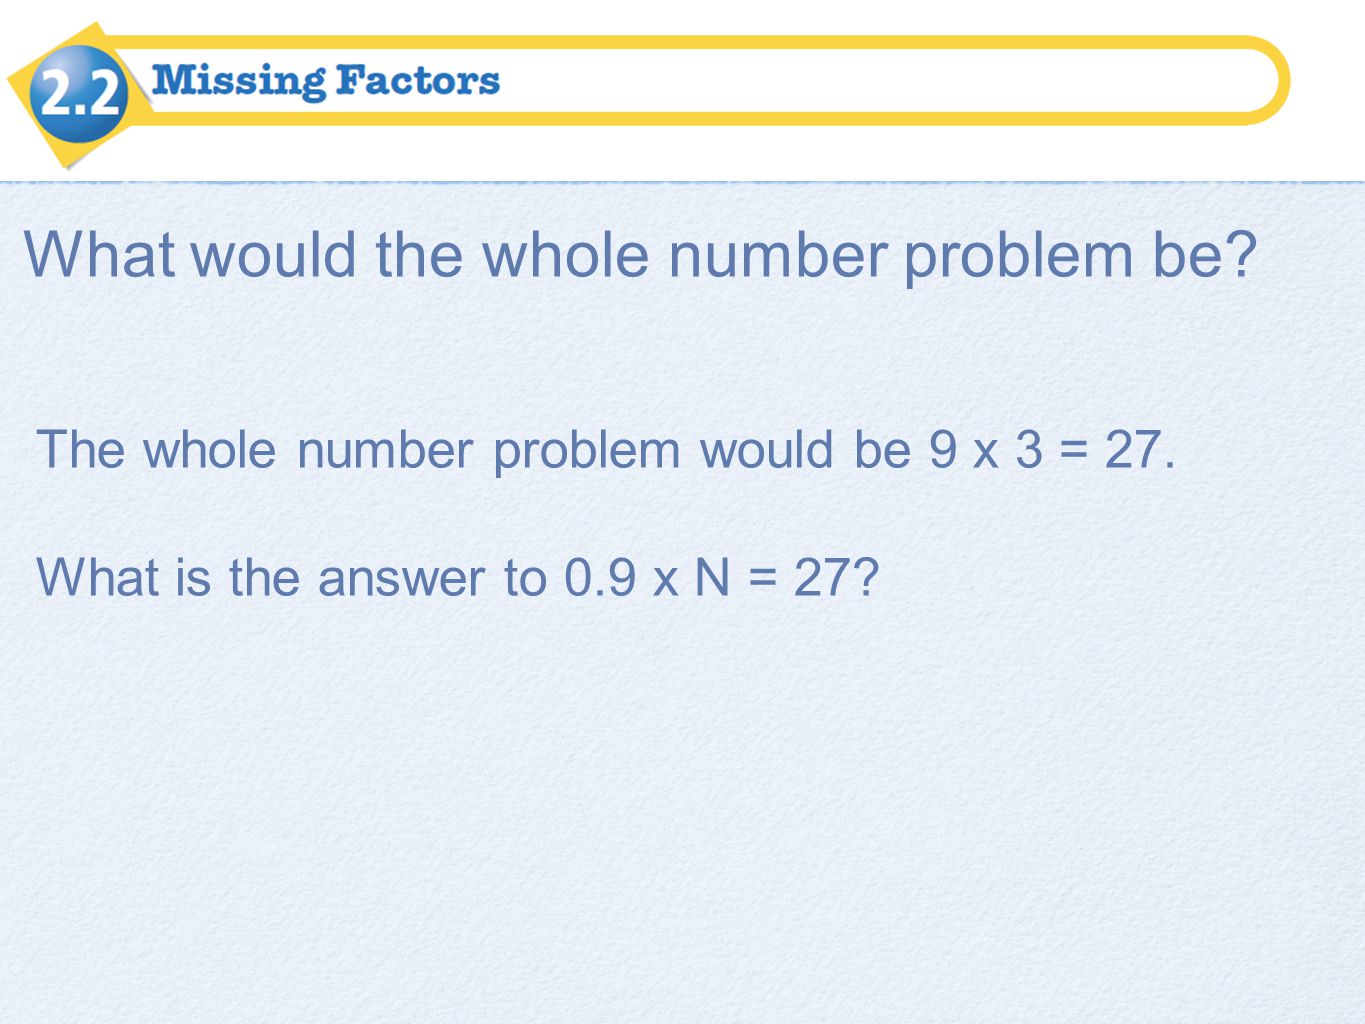 What would the whole number problem be